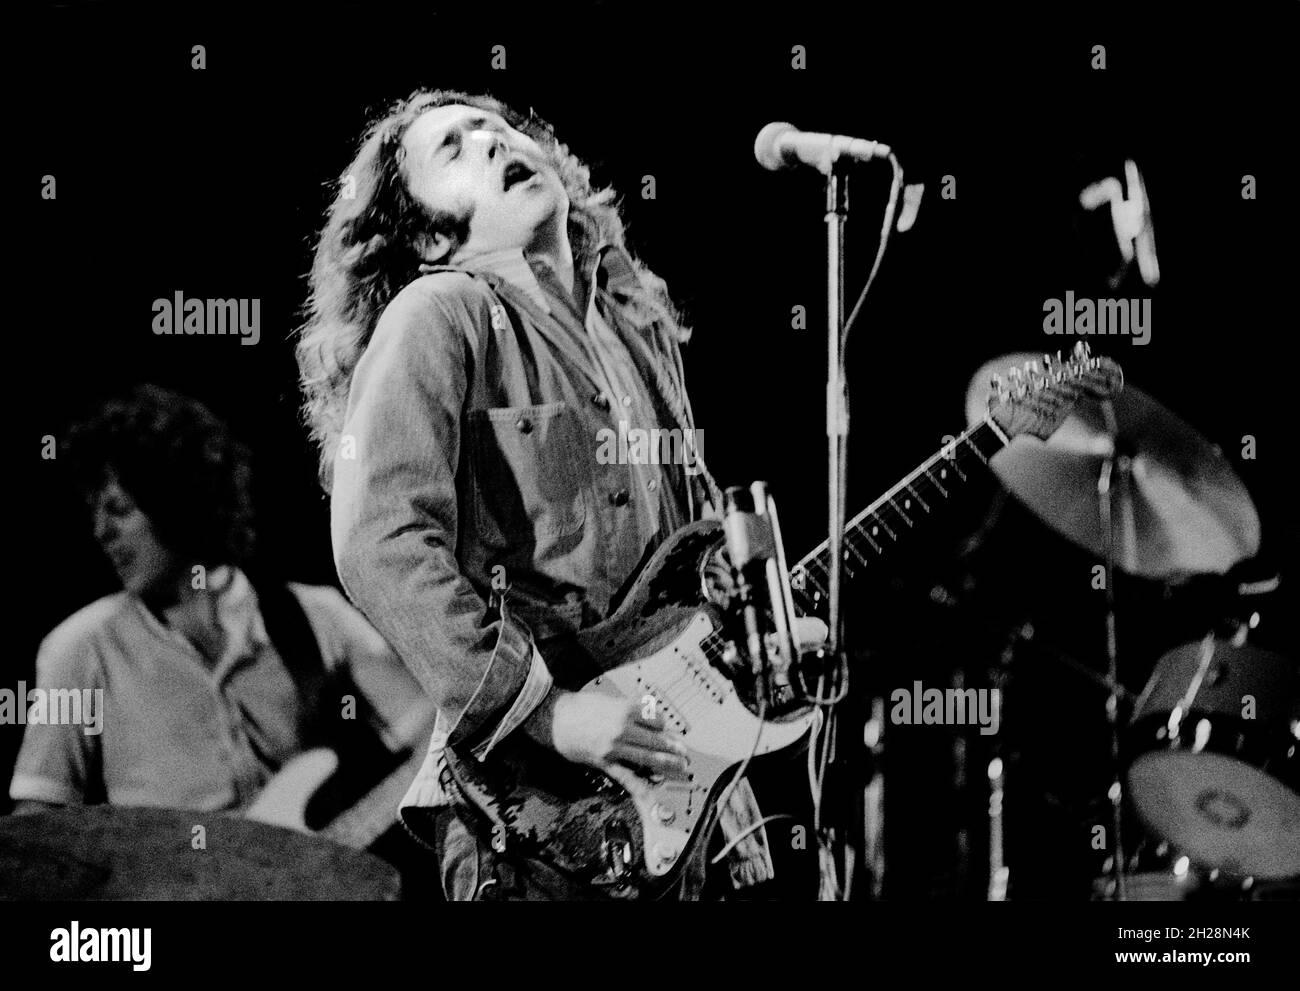 Irish blues/rock guitarist and singer Rory Gallagher at the Lyceum Theatre, London, England in 1977. Stock Photo